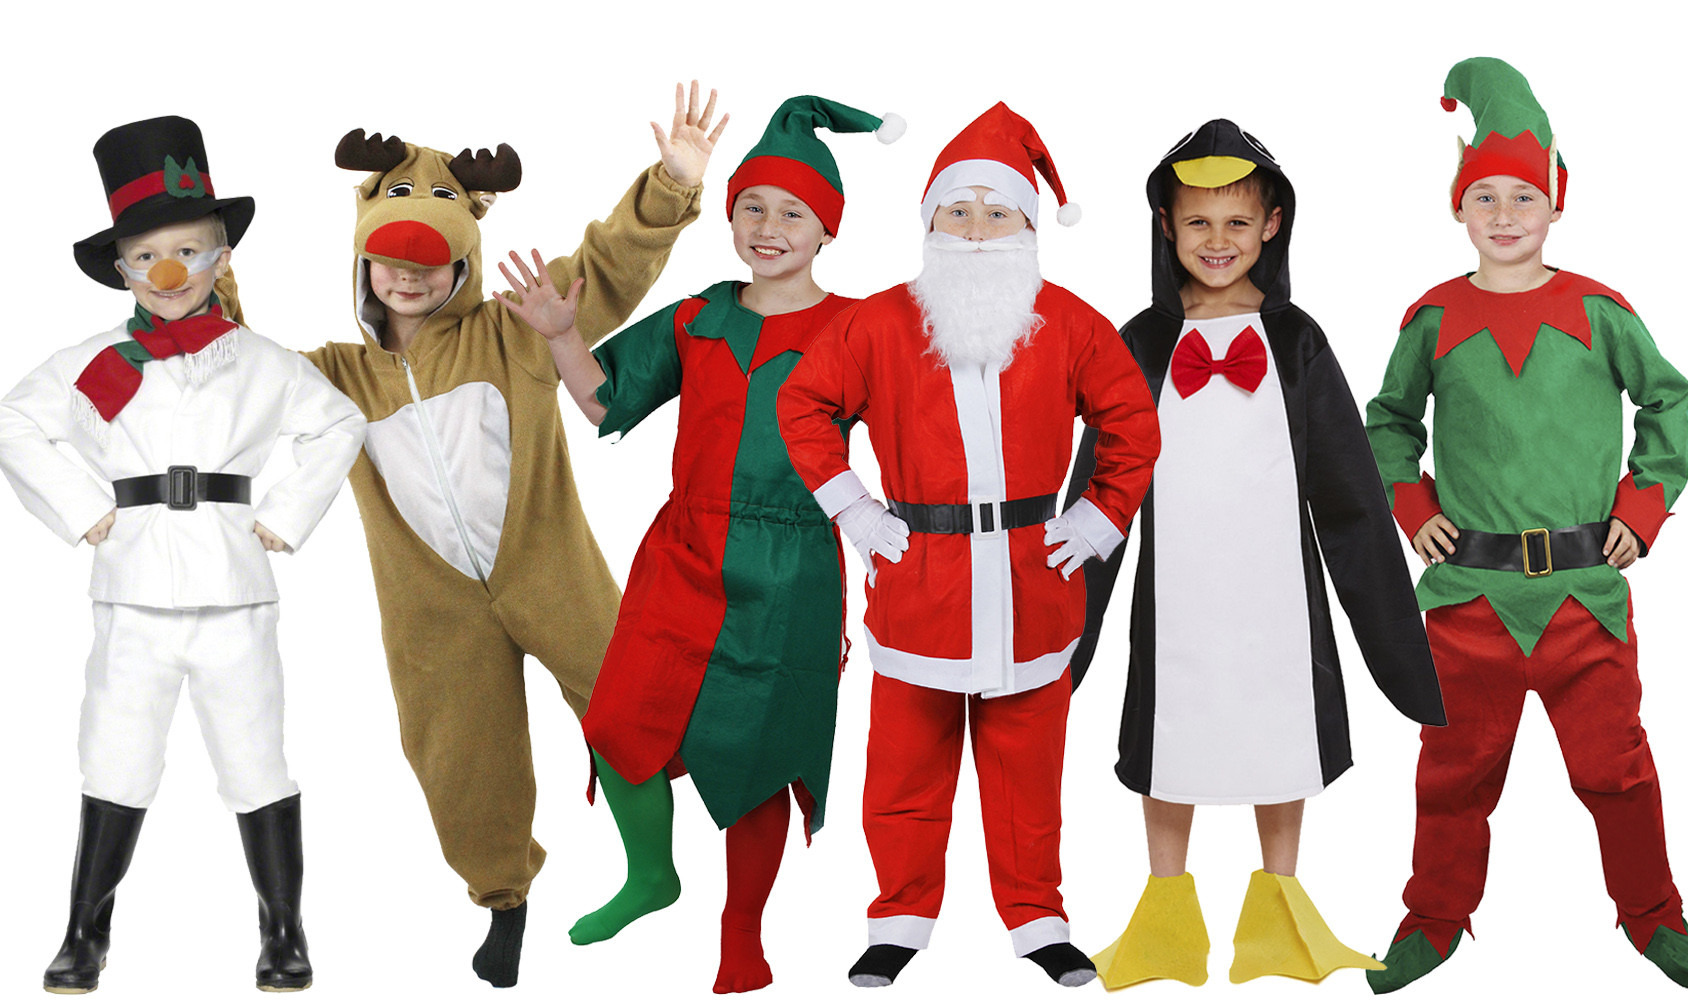 Christmas Party Costume Theme Ideas
 BOYS CHRISTMAS THEMED FANCY DRESS COSTUMES CHILDS FESTIVE